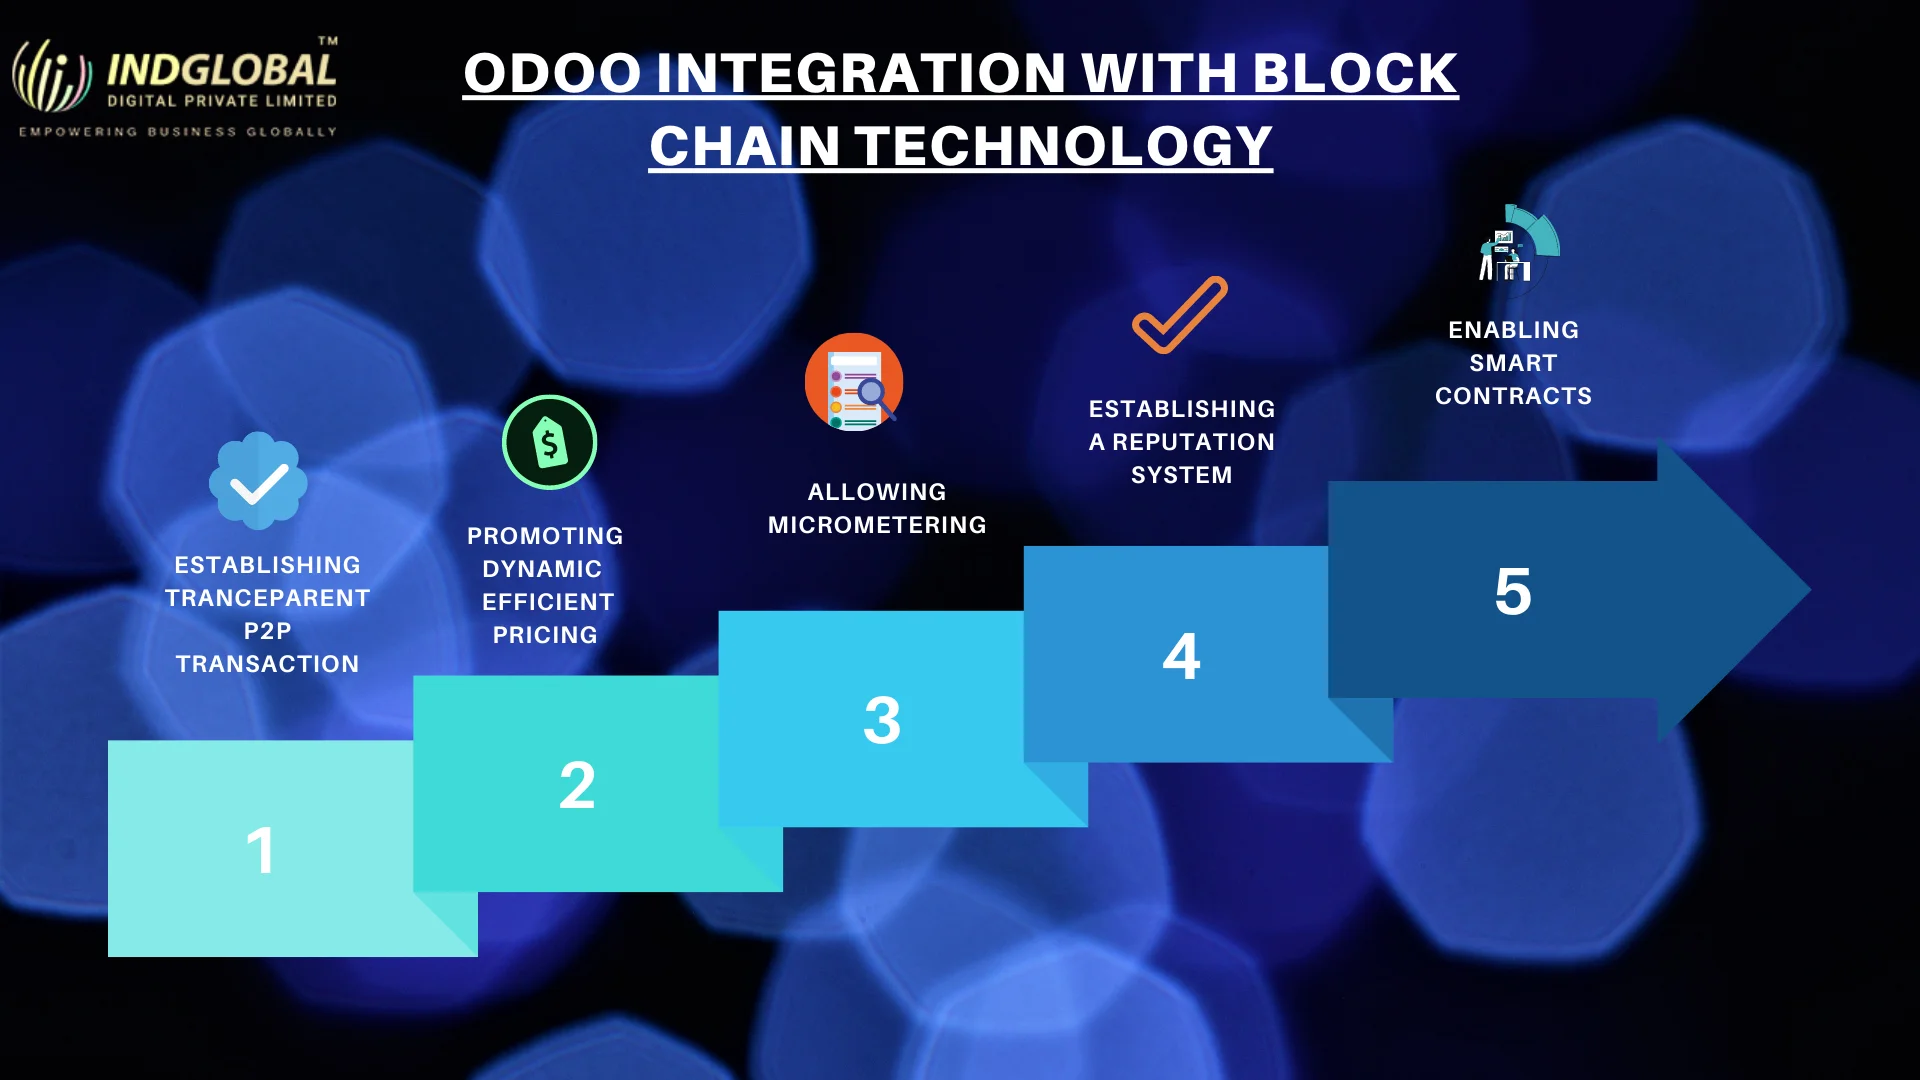 How Does Odoo Integration With Blockchain Affect Your Business